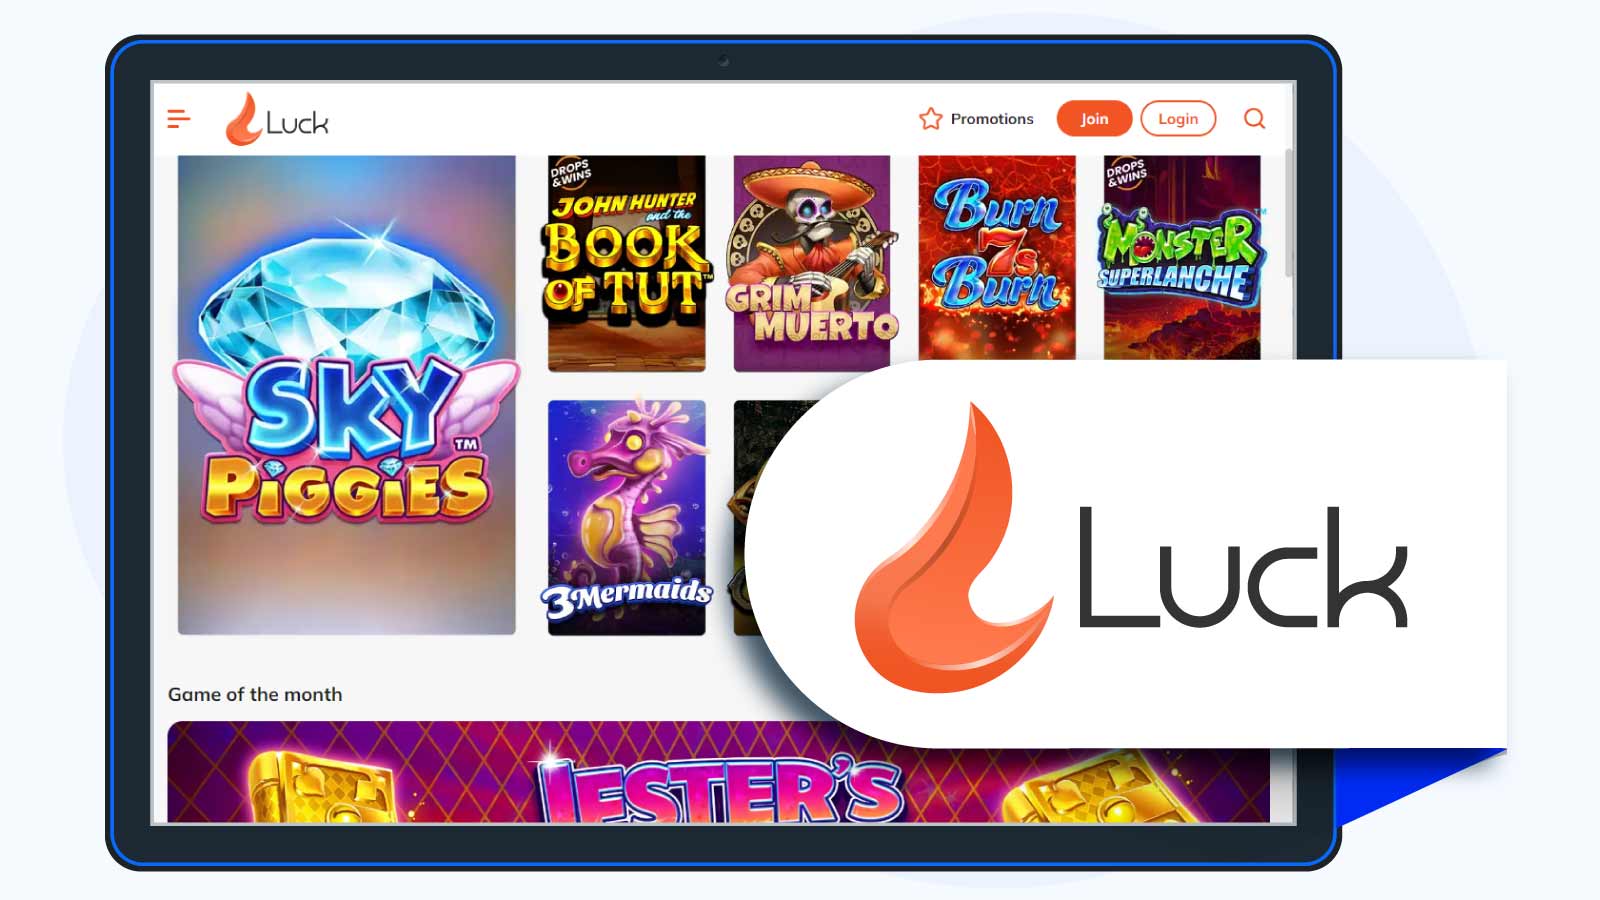 Luck.com – Top Choice PayPal Casino for New Players